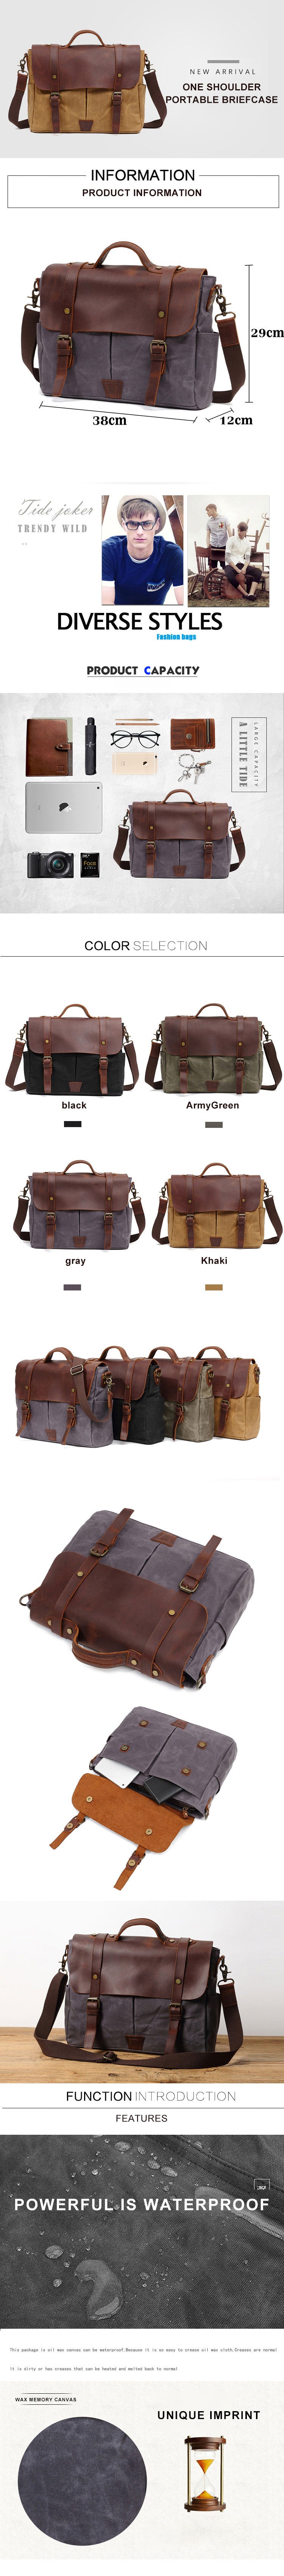 DETAIL INFORMATION AND PRODUCT DISPLAY of Woosir Crossbody Laptop Bag